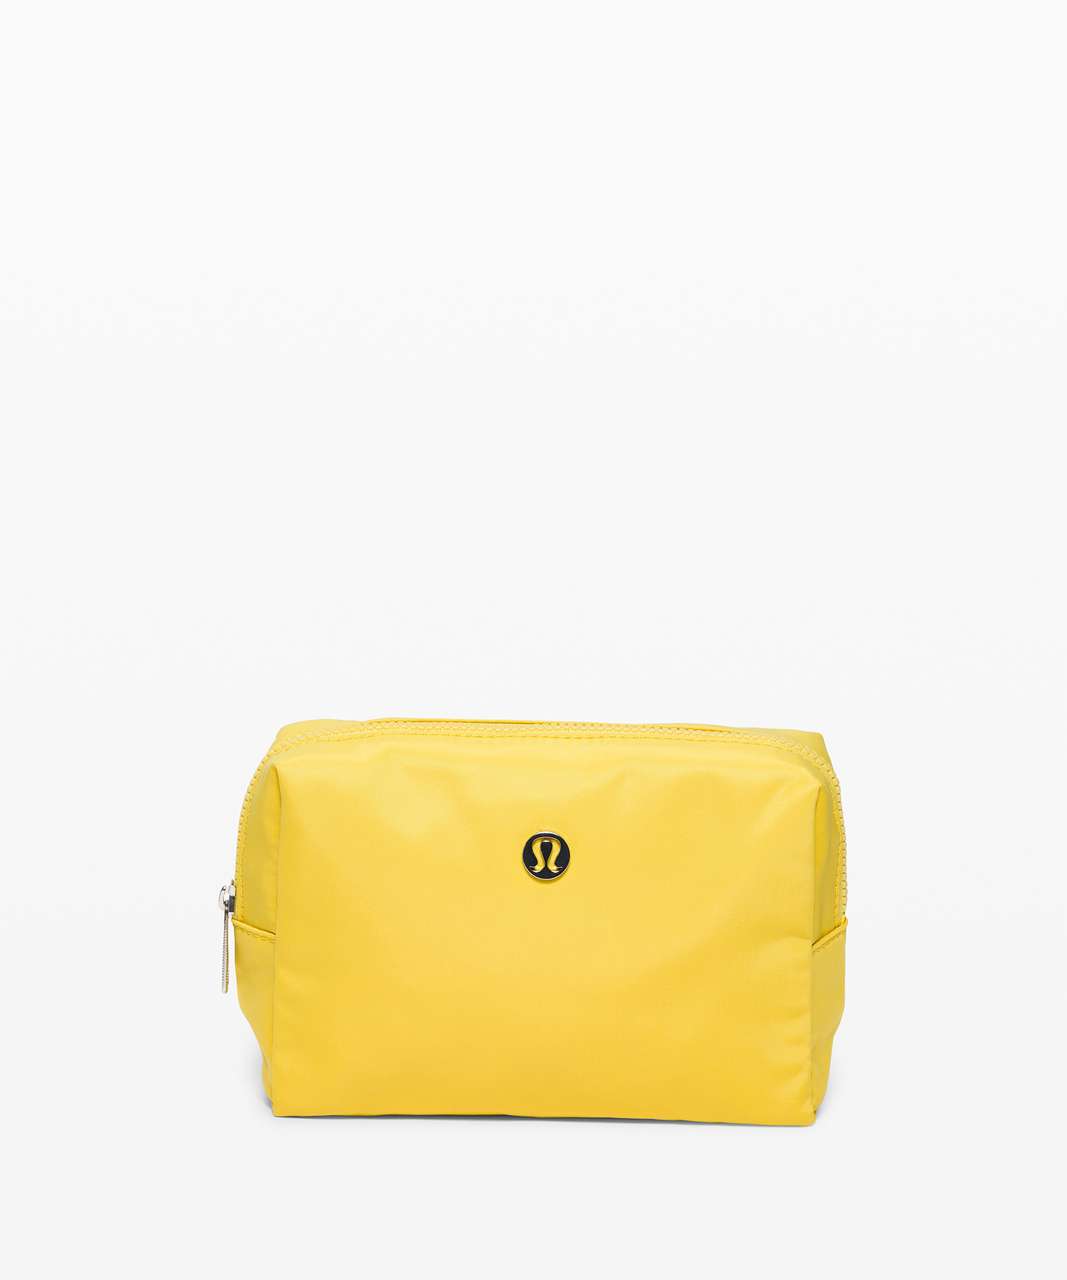 Lululemon All Your Small Things Pouch *Mini 2L - Soleil